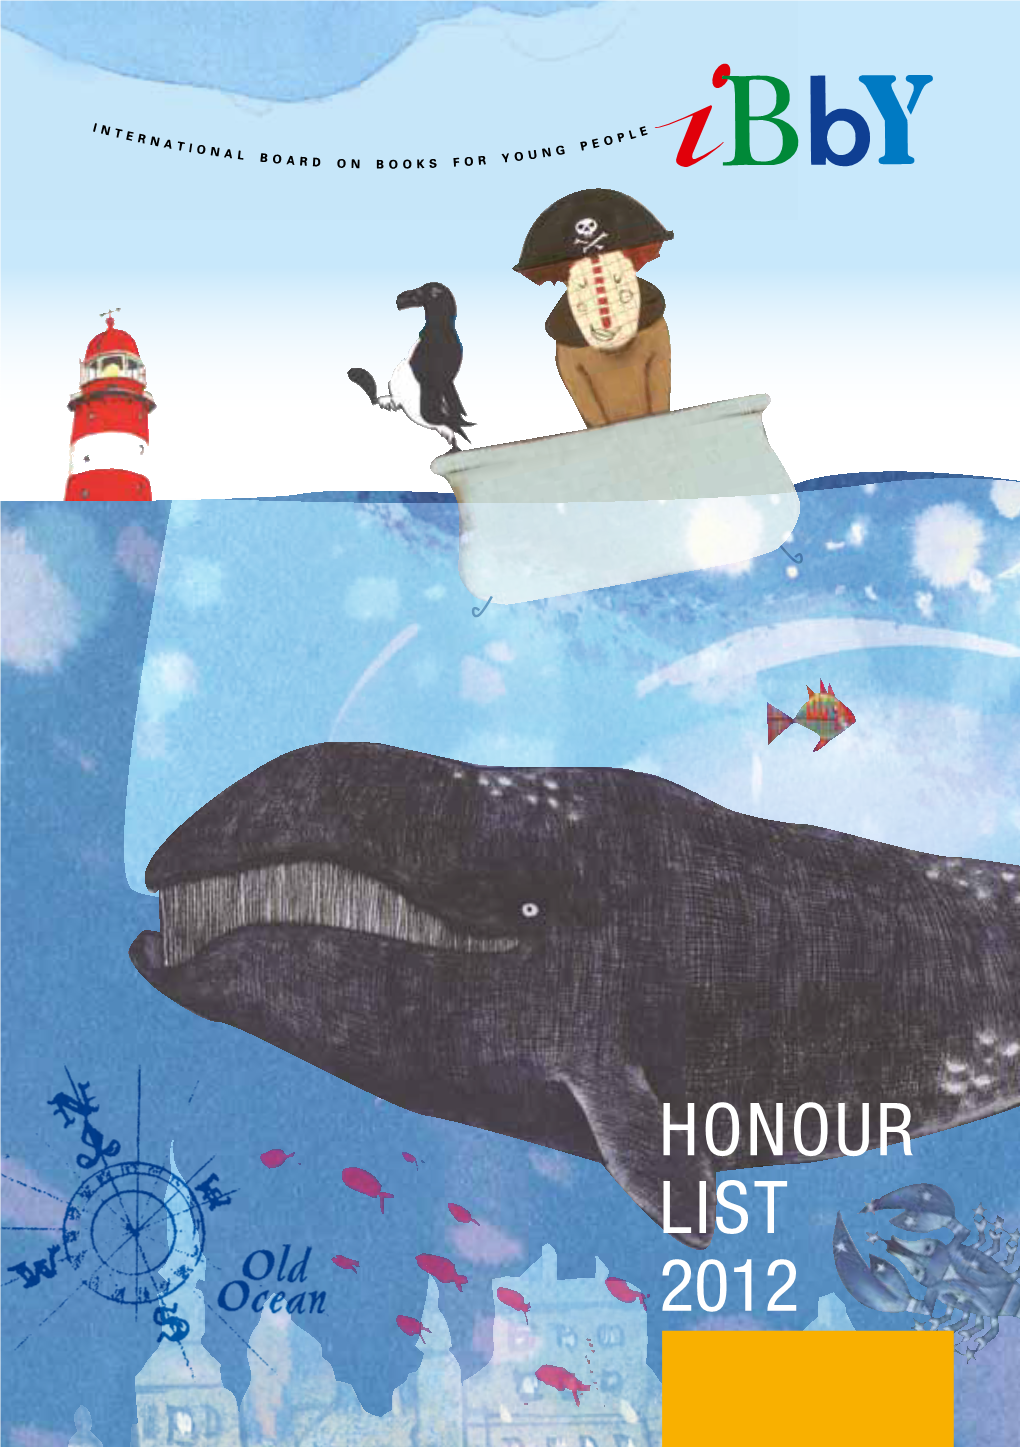 Honour List 2012 © International Board on Books for Young People (IBBY), 2012